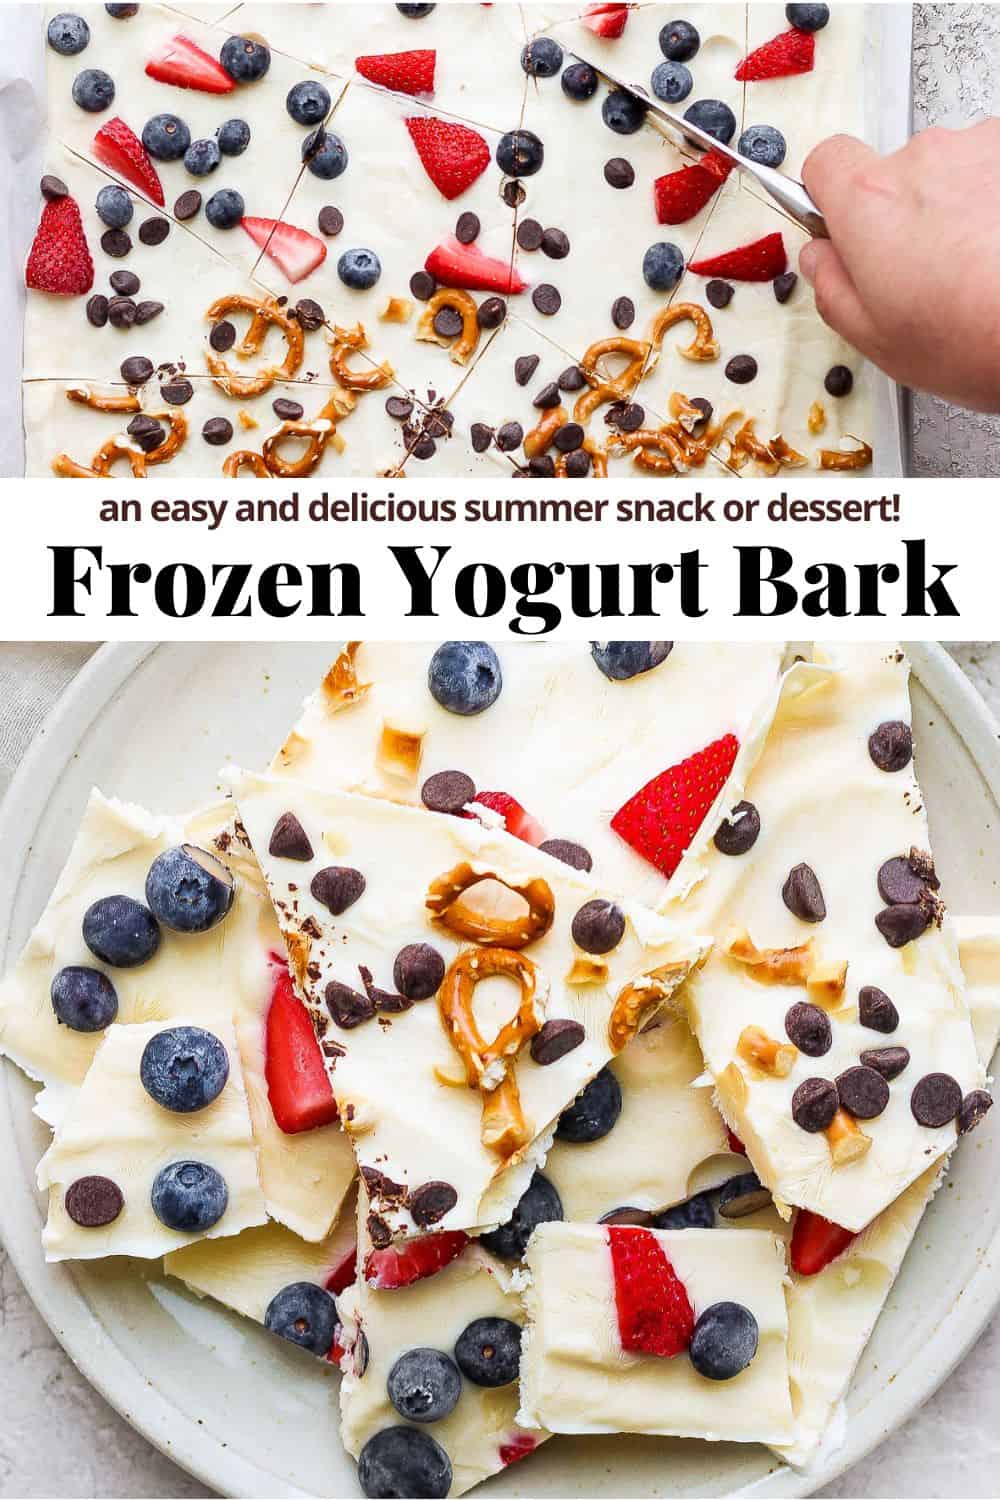 Pinterest image that reads "an easy and delicious summer snack or dessert! Frozen Yogurt Park" with photos of a plate full of frozen yogurt bark pieces.